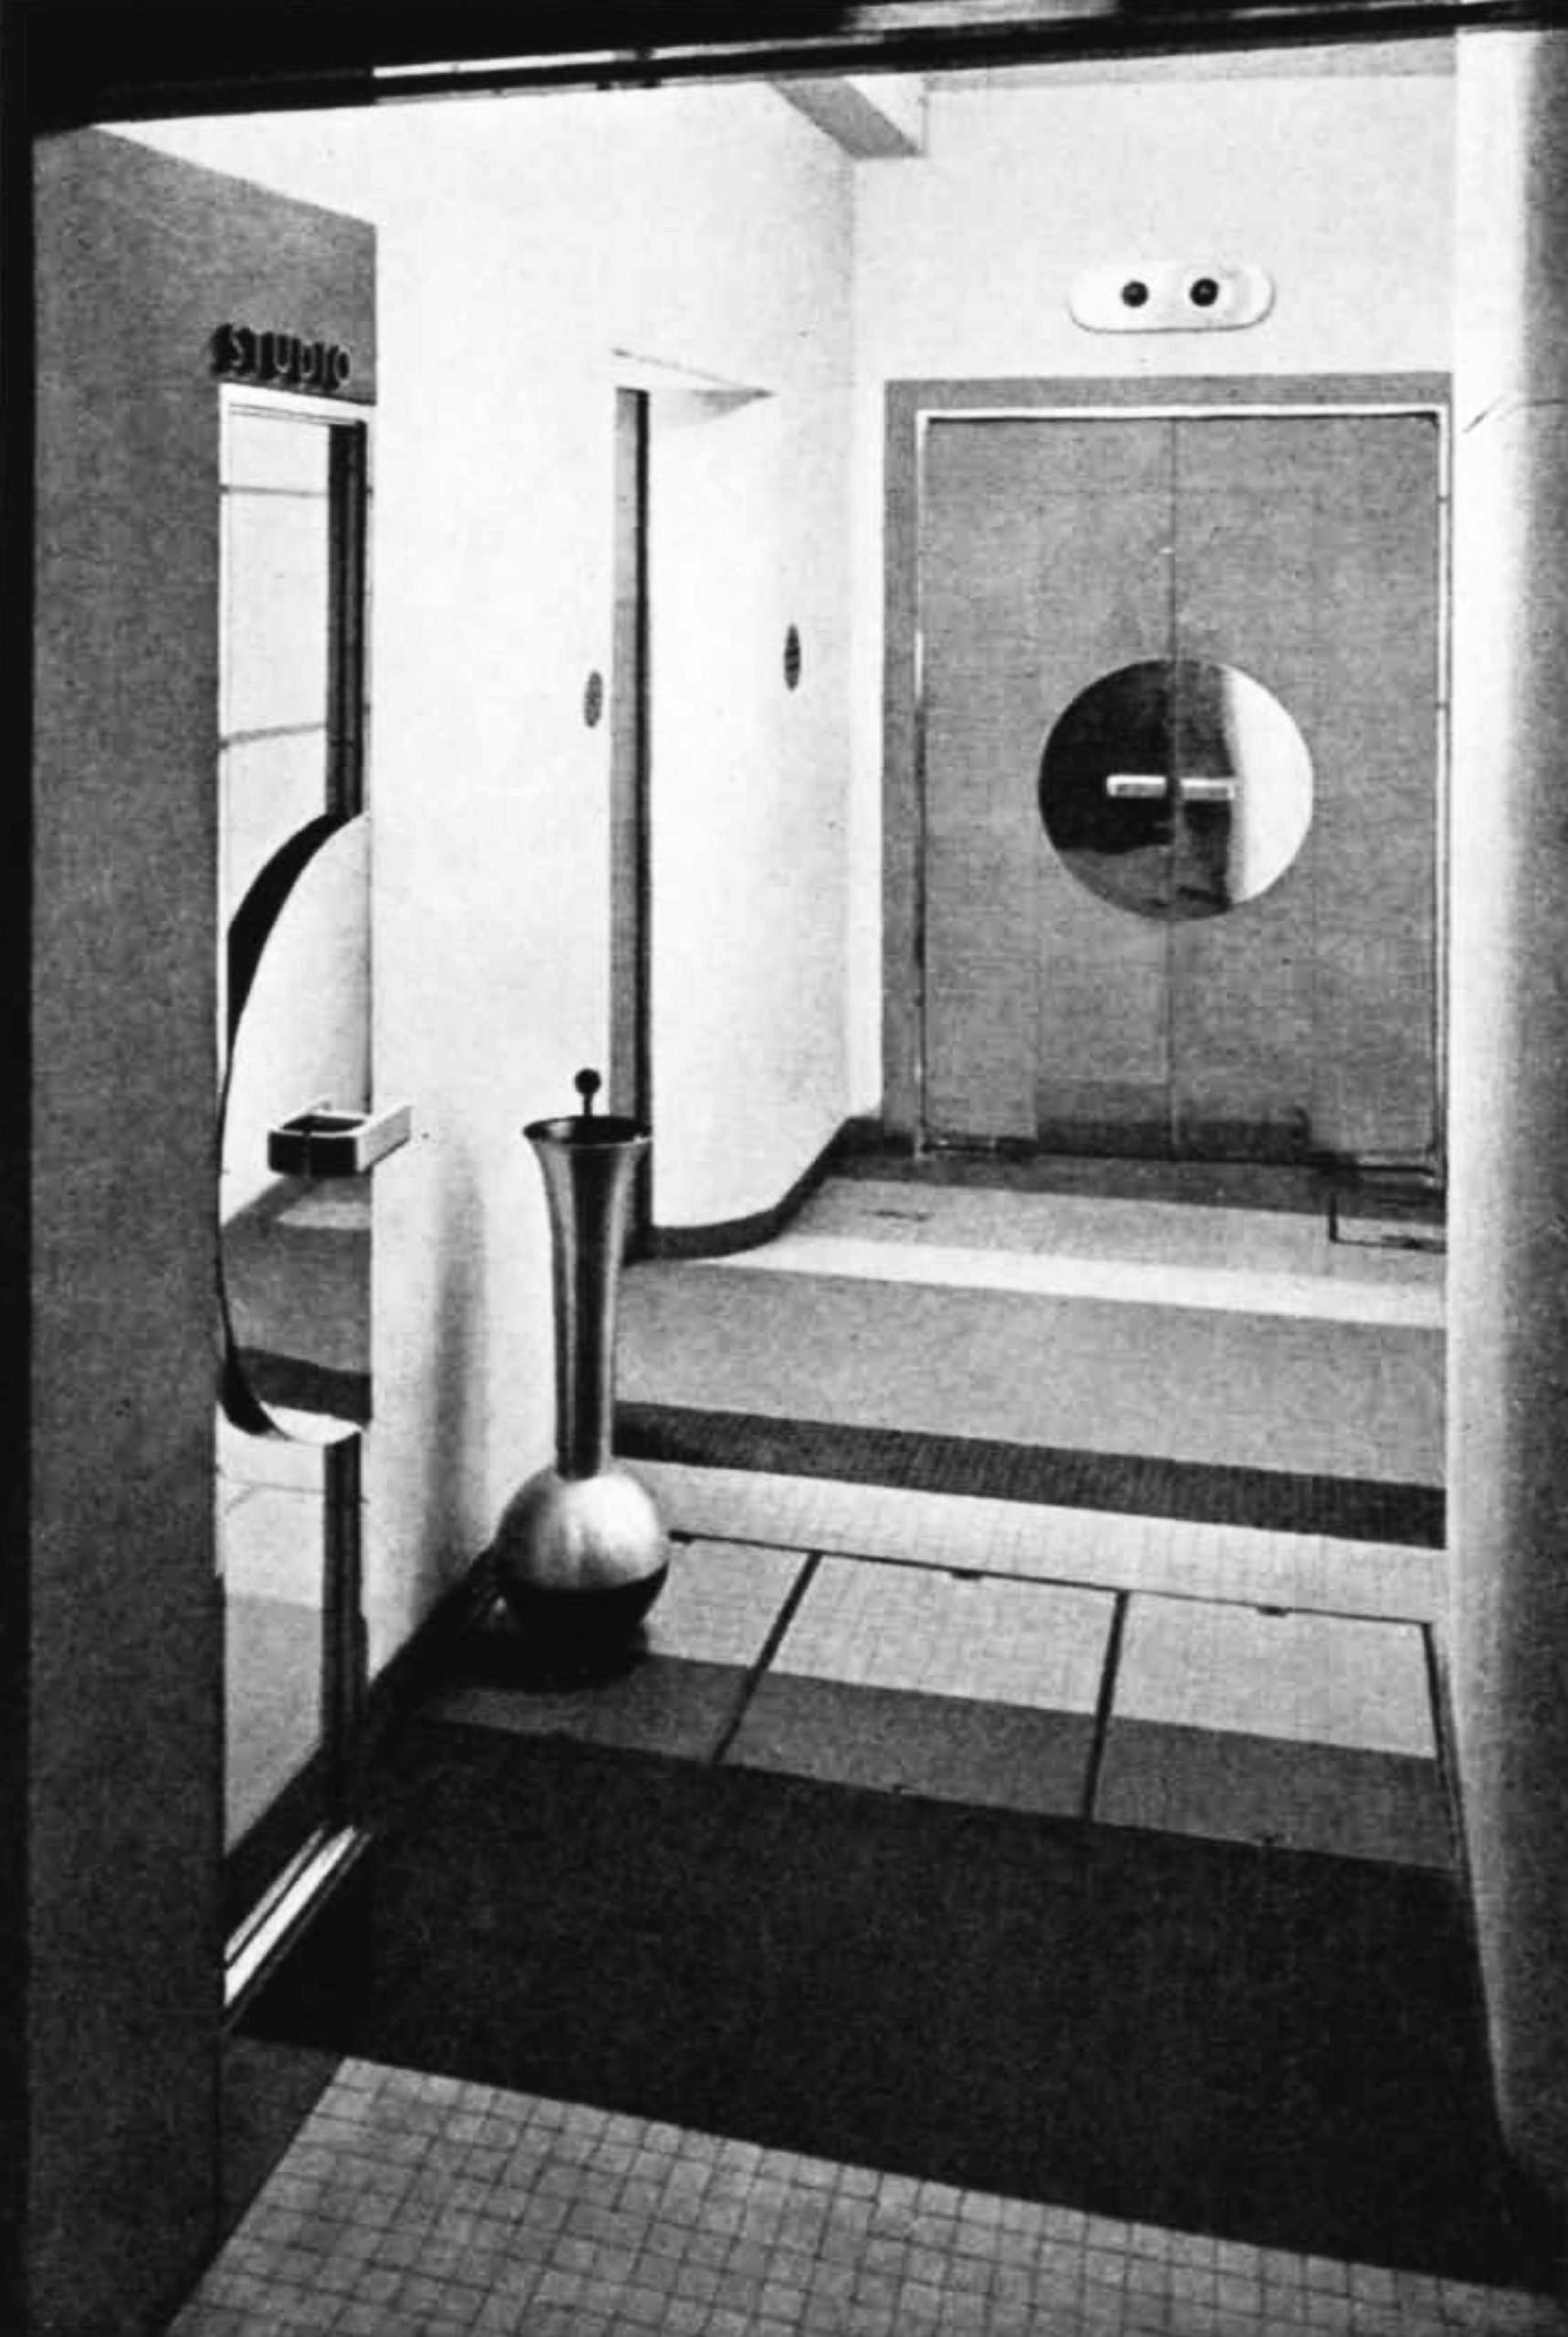 A corridor with a fancy free-standing ashtray, leading to wooden doors with a shiny metal circular push-plate